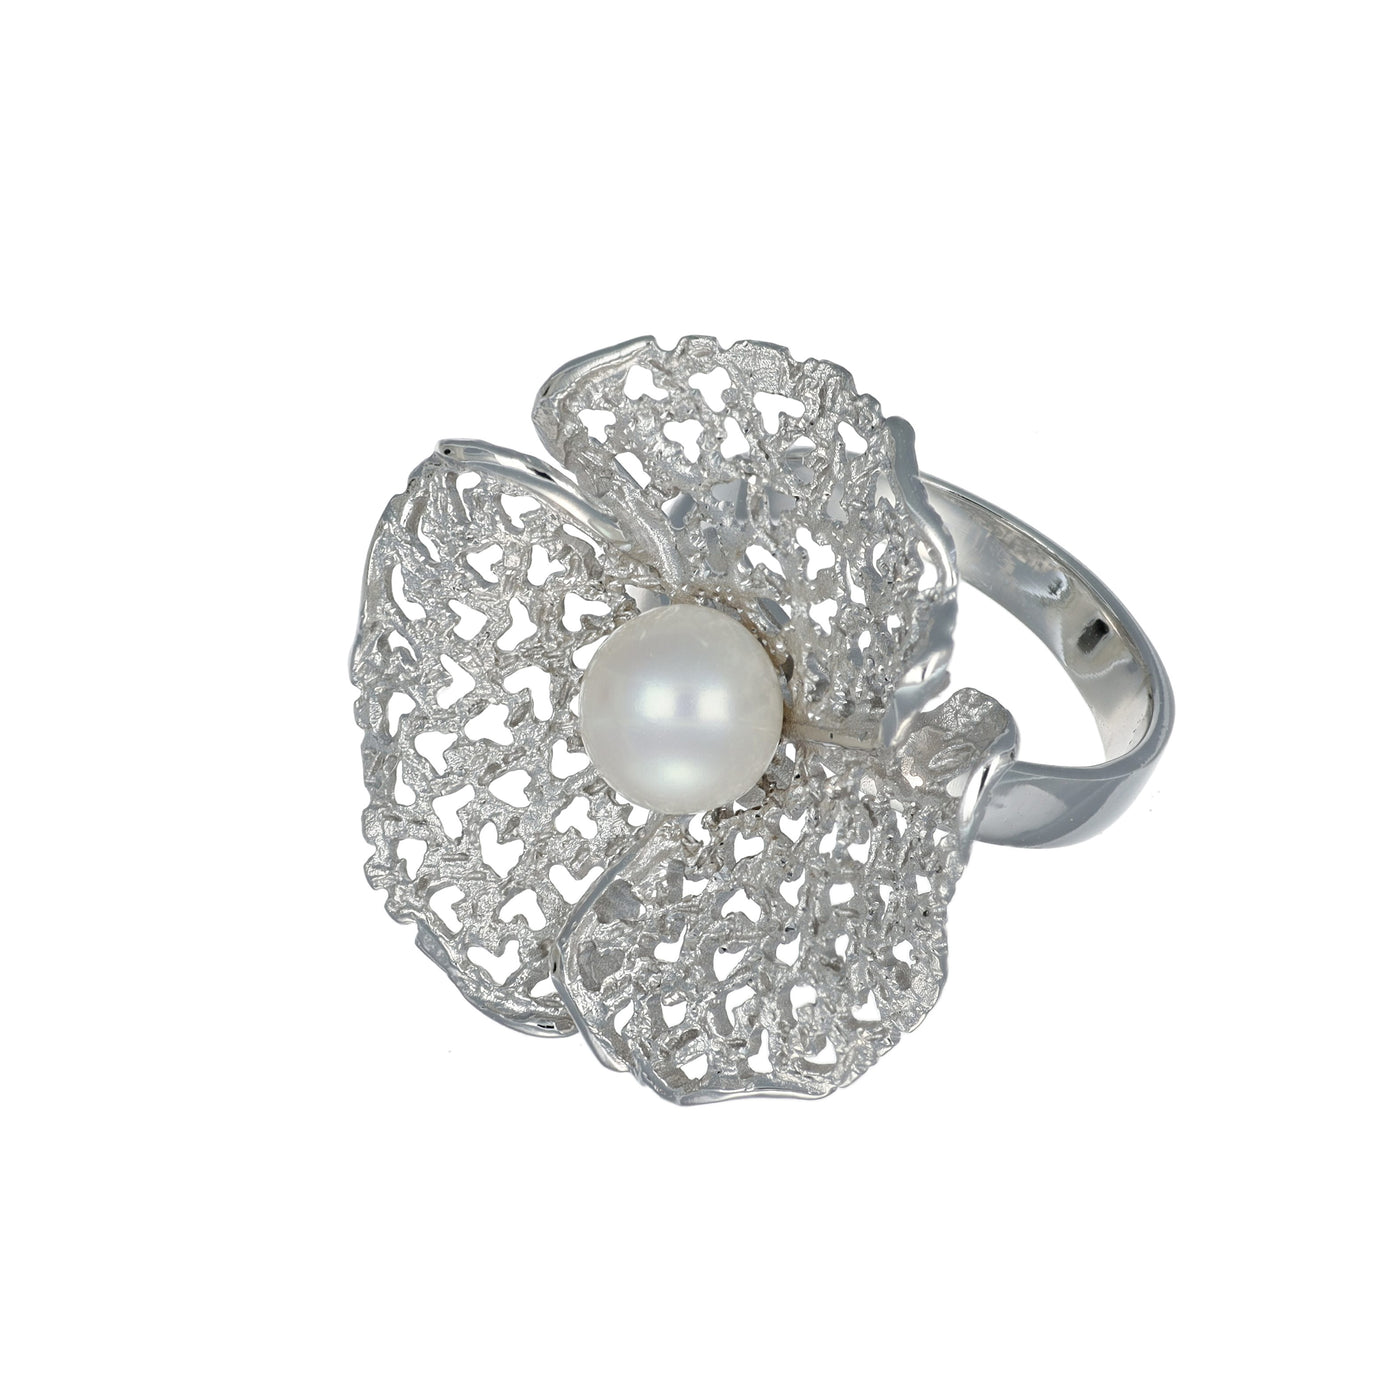 IL Diletto - Silver Flower Stardust Ring, Rhodium Plated